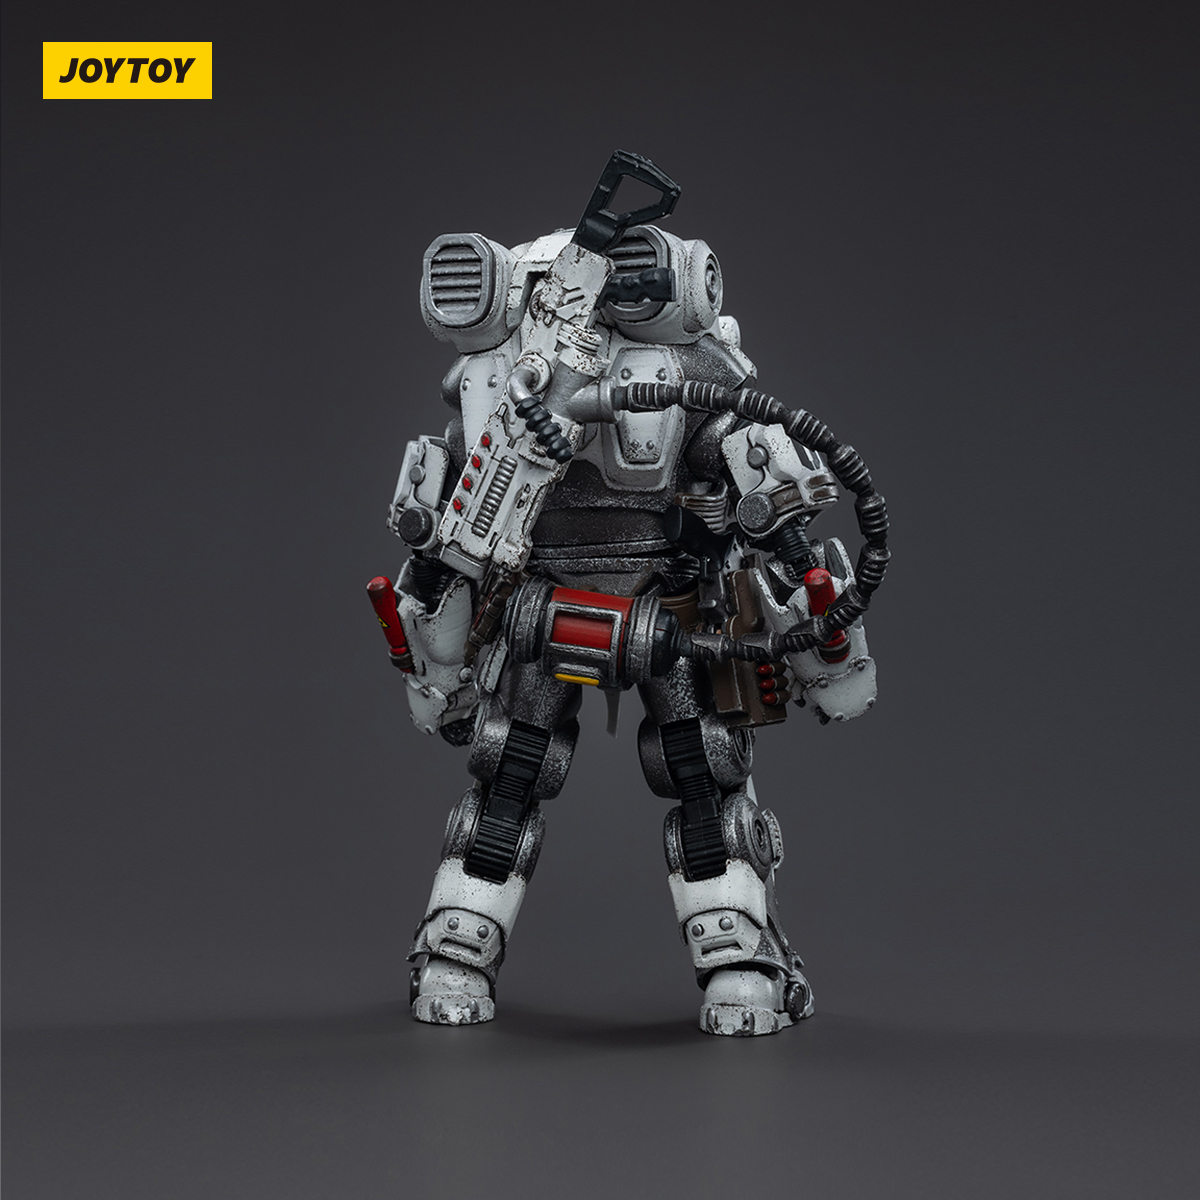 JOYTOY JT3303 1:18 Sorrow Expeditionary Forces-9th Army of the